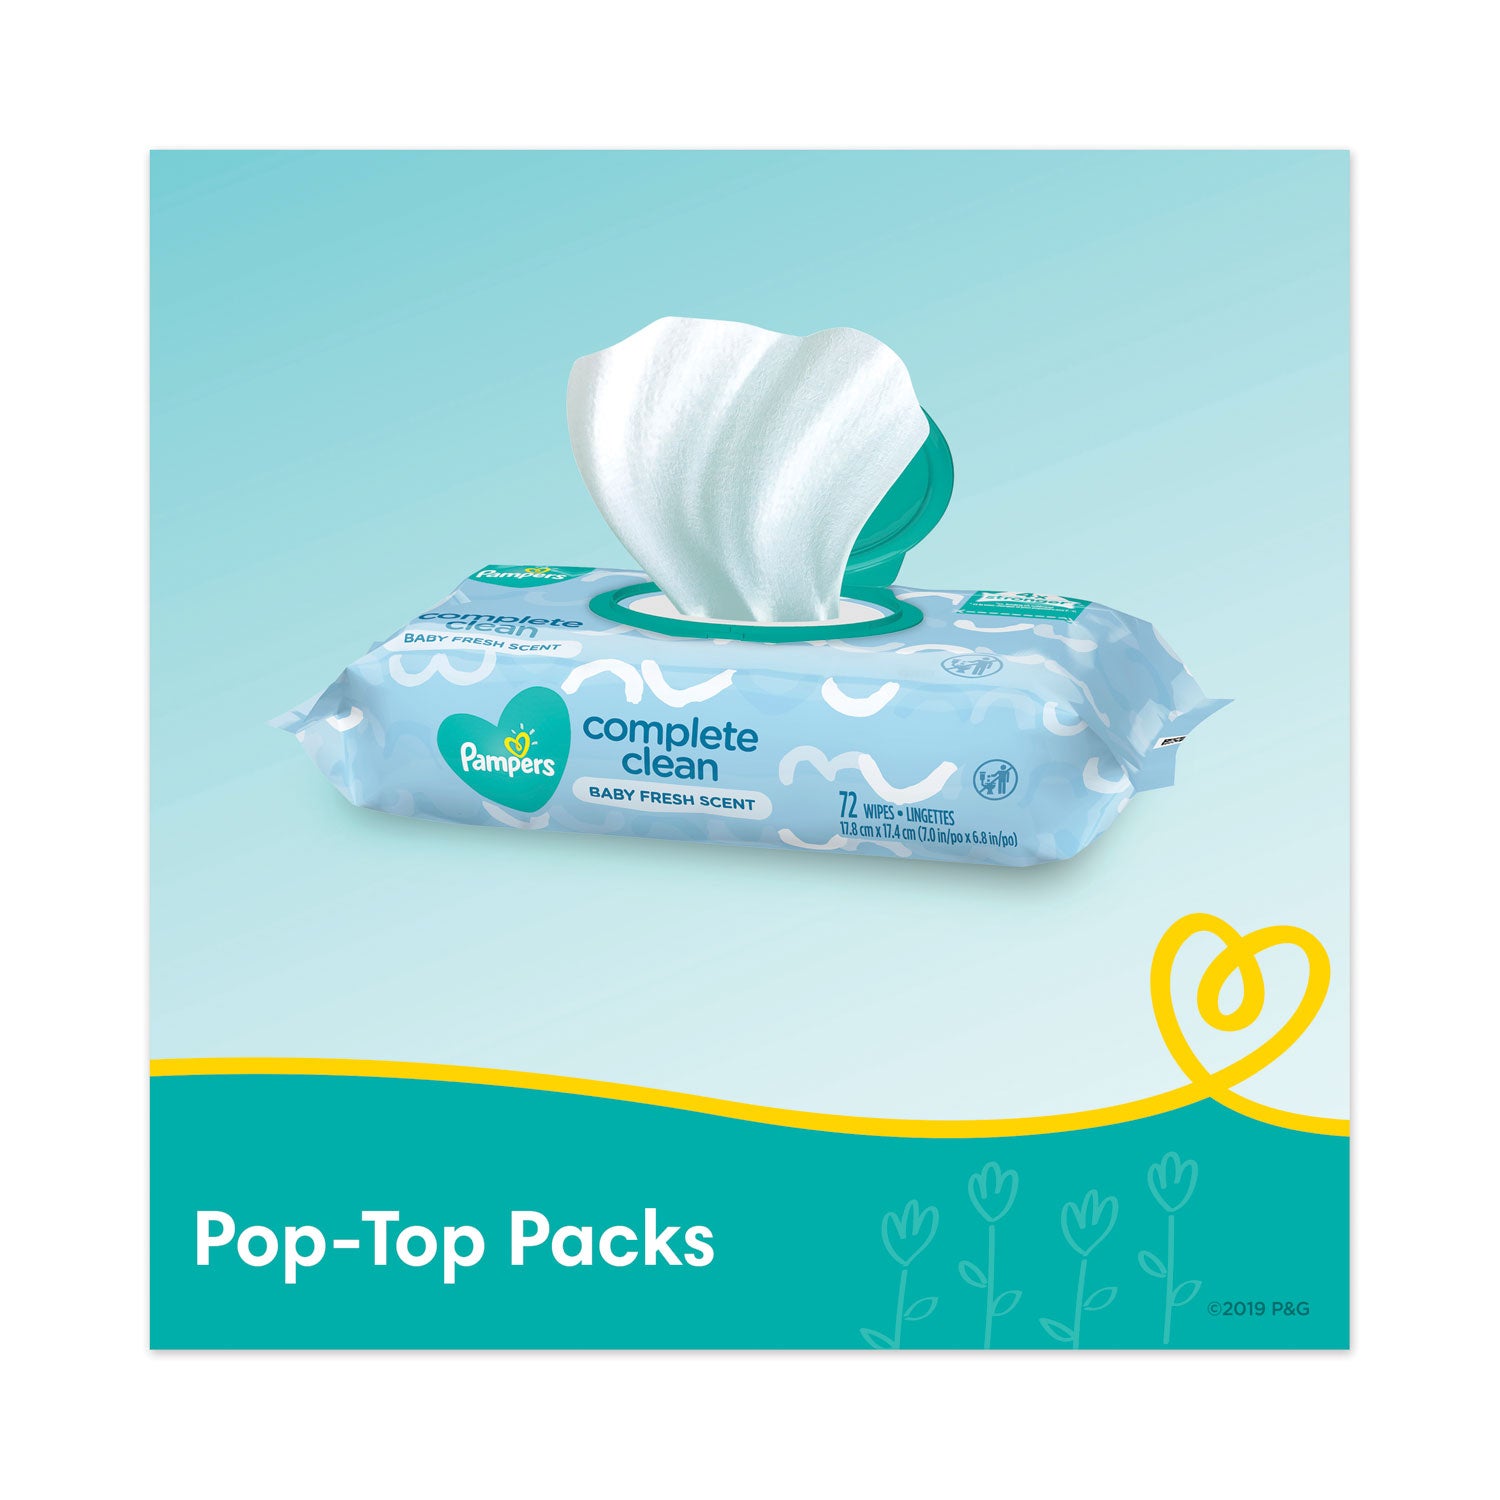 complete-clean-baby-wipes-1-ply-baby-fresh-7-x-68-white-72-wipes-pack-8-packs-carton_pgc75536 - 2